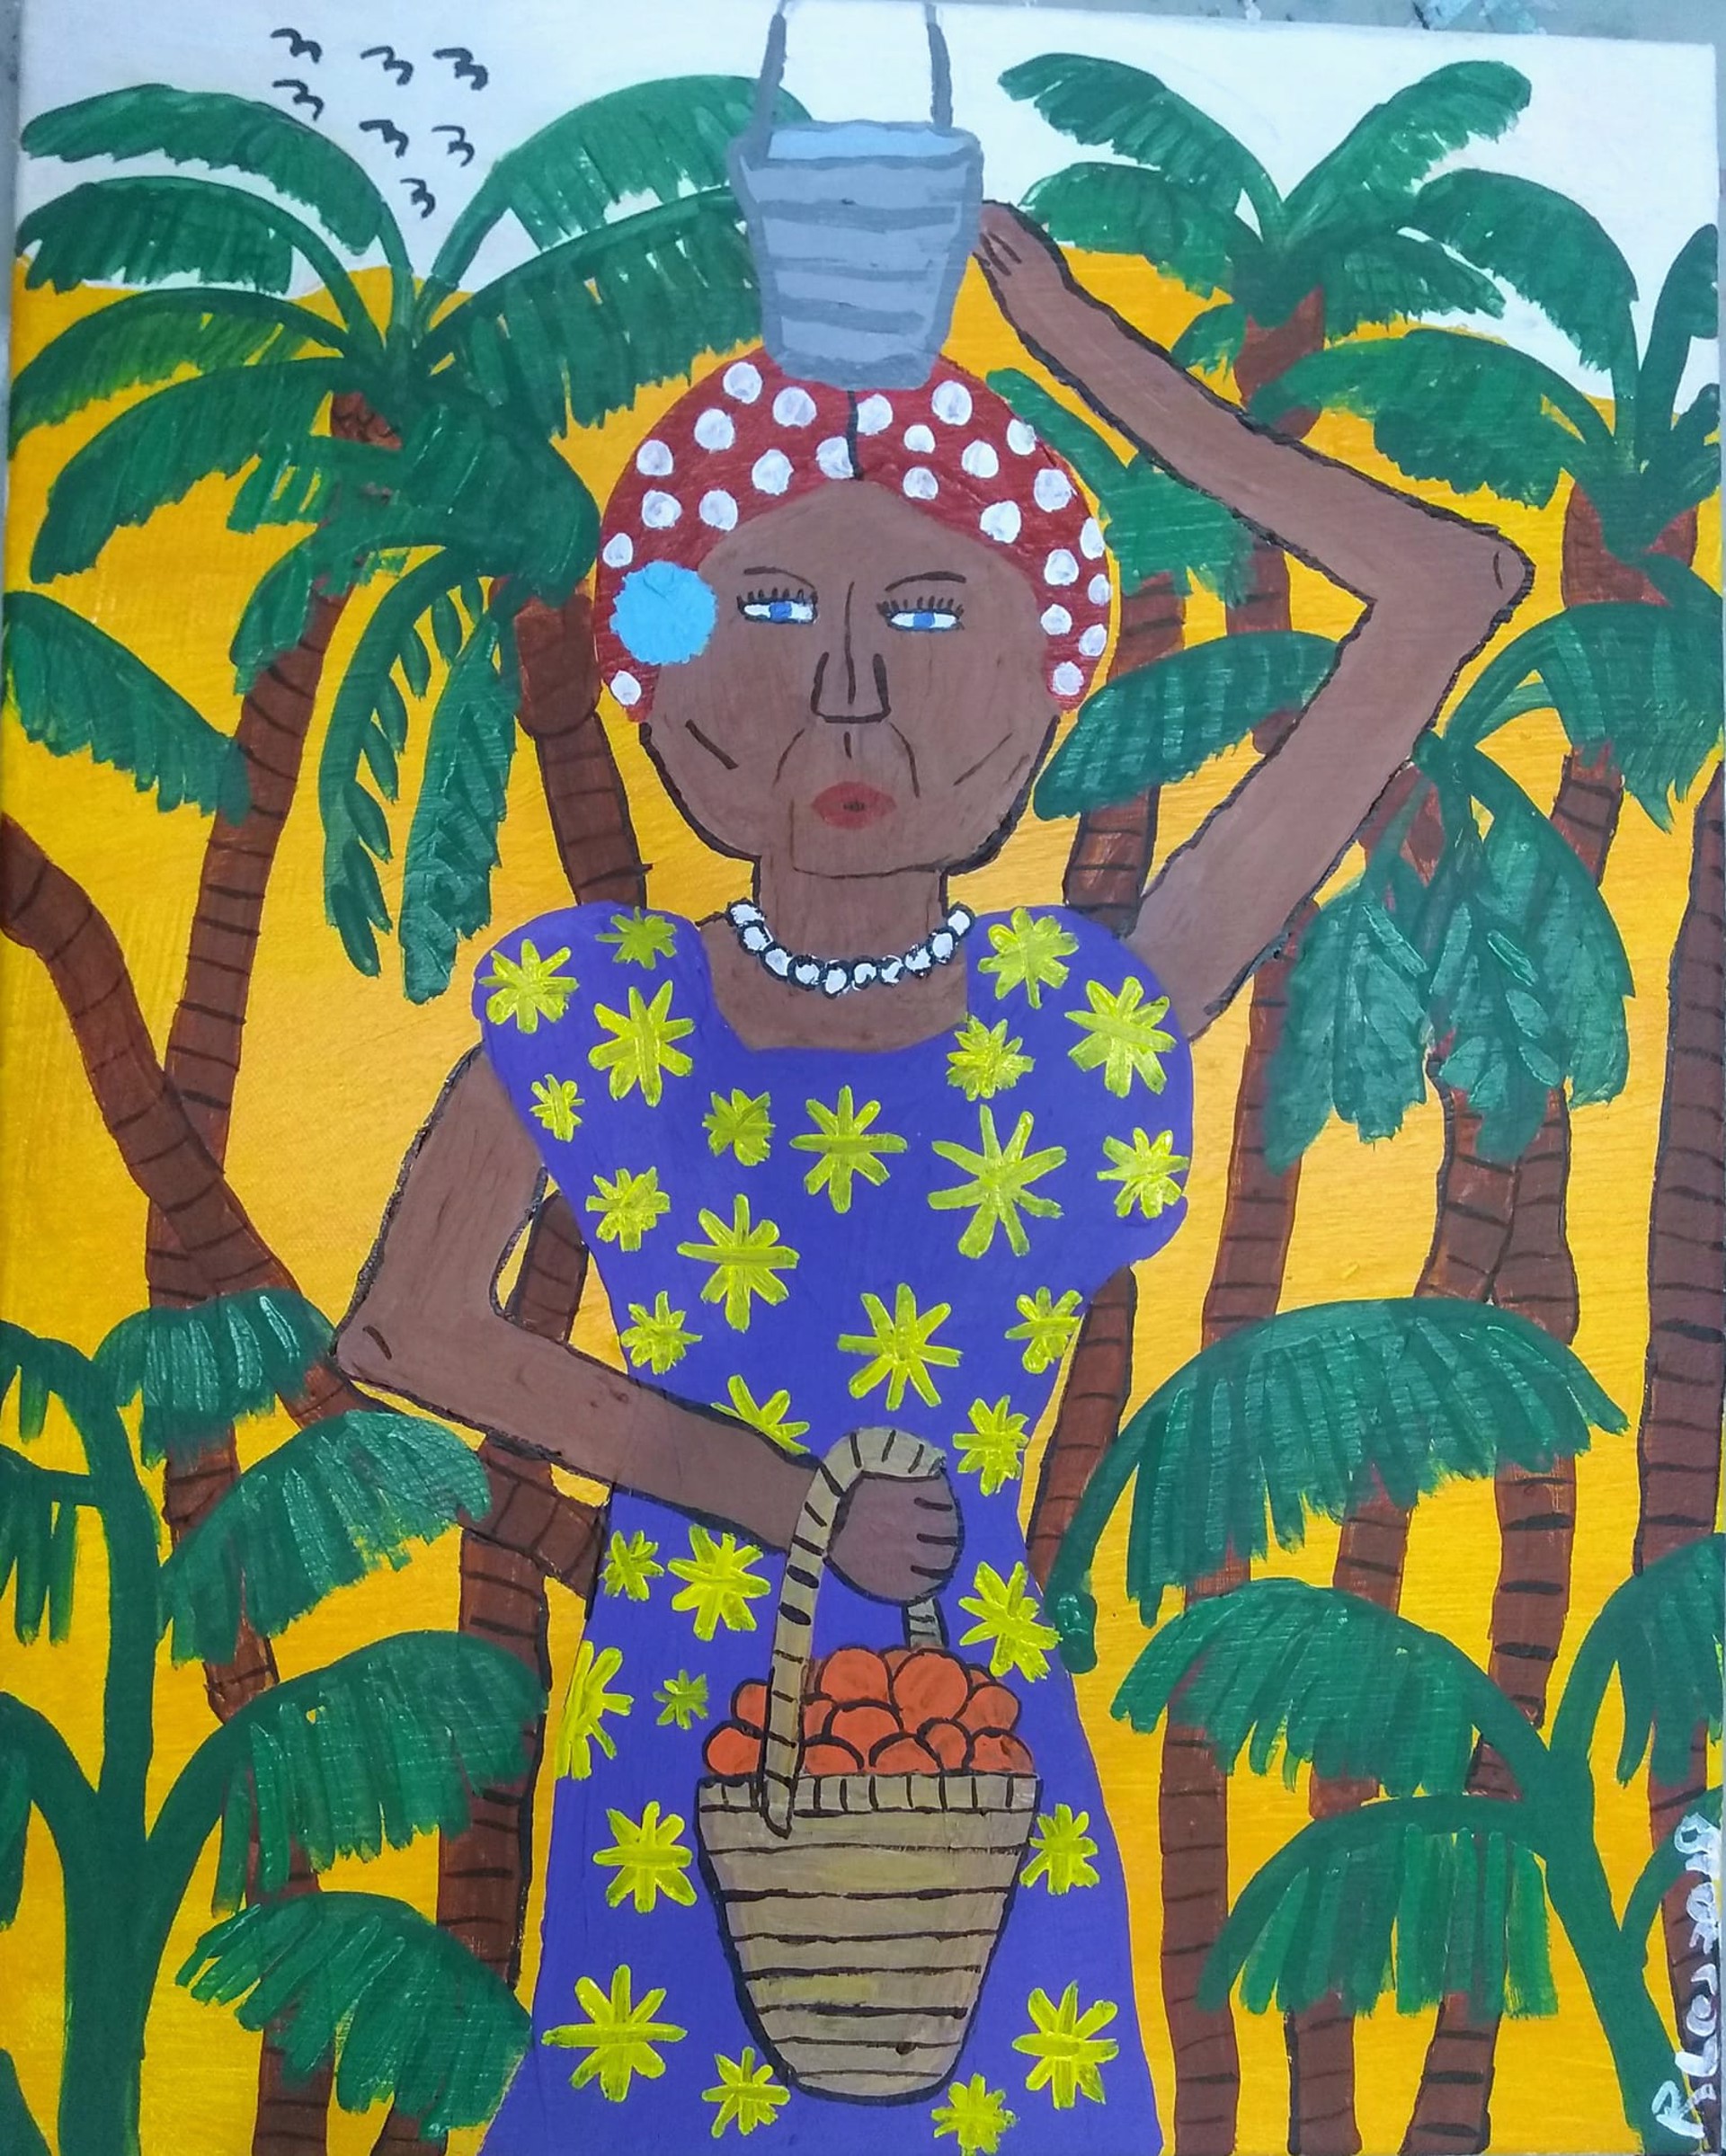 Woman from the Carribean Holding a Basket of Oranges by Ray Lopez